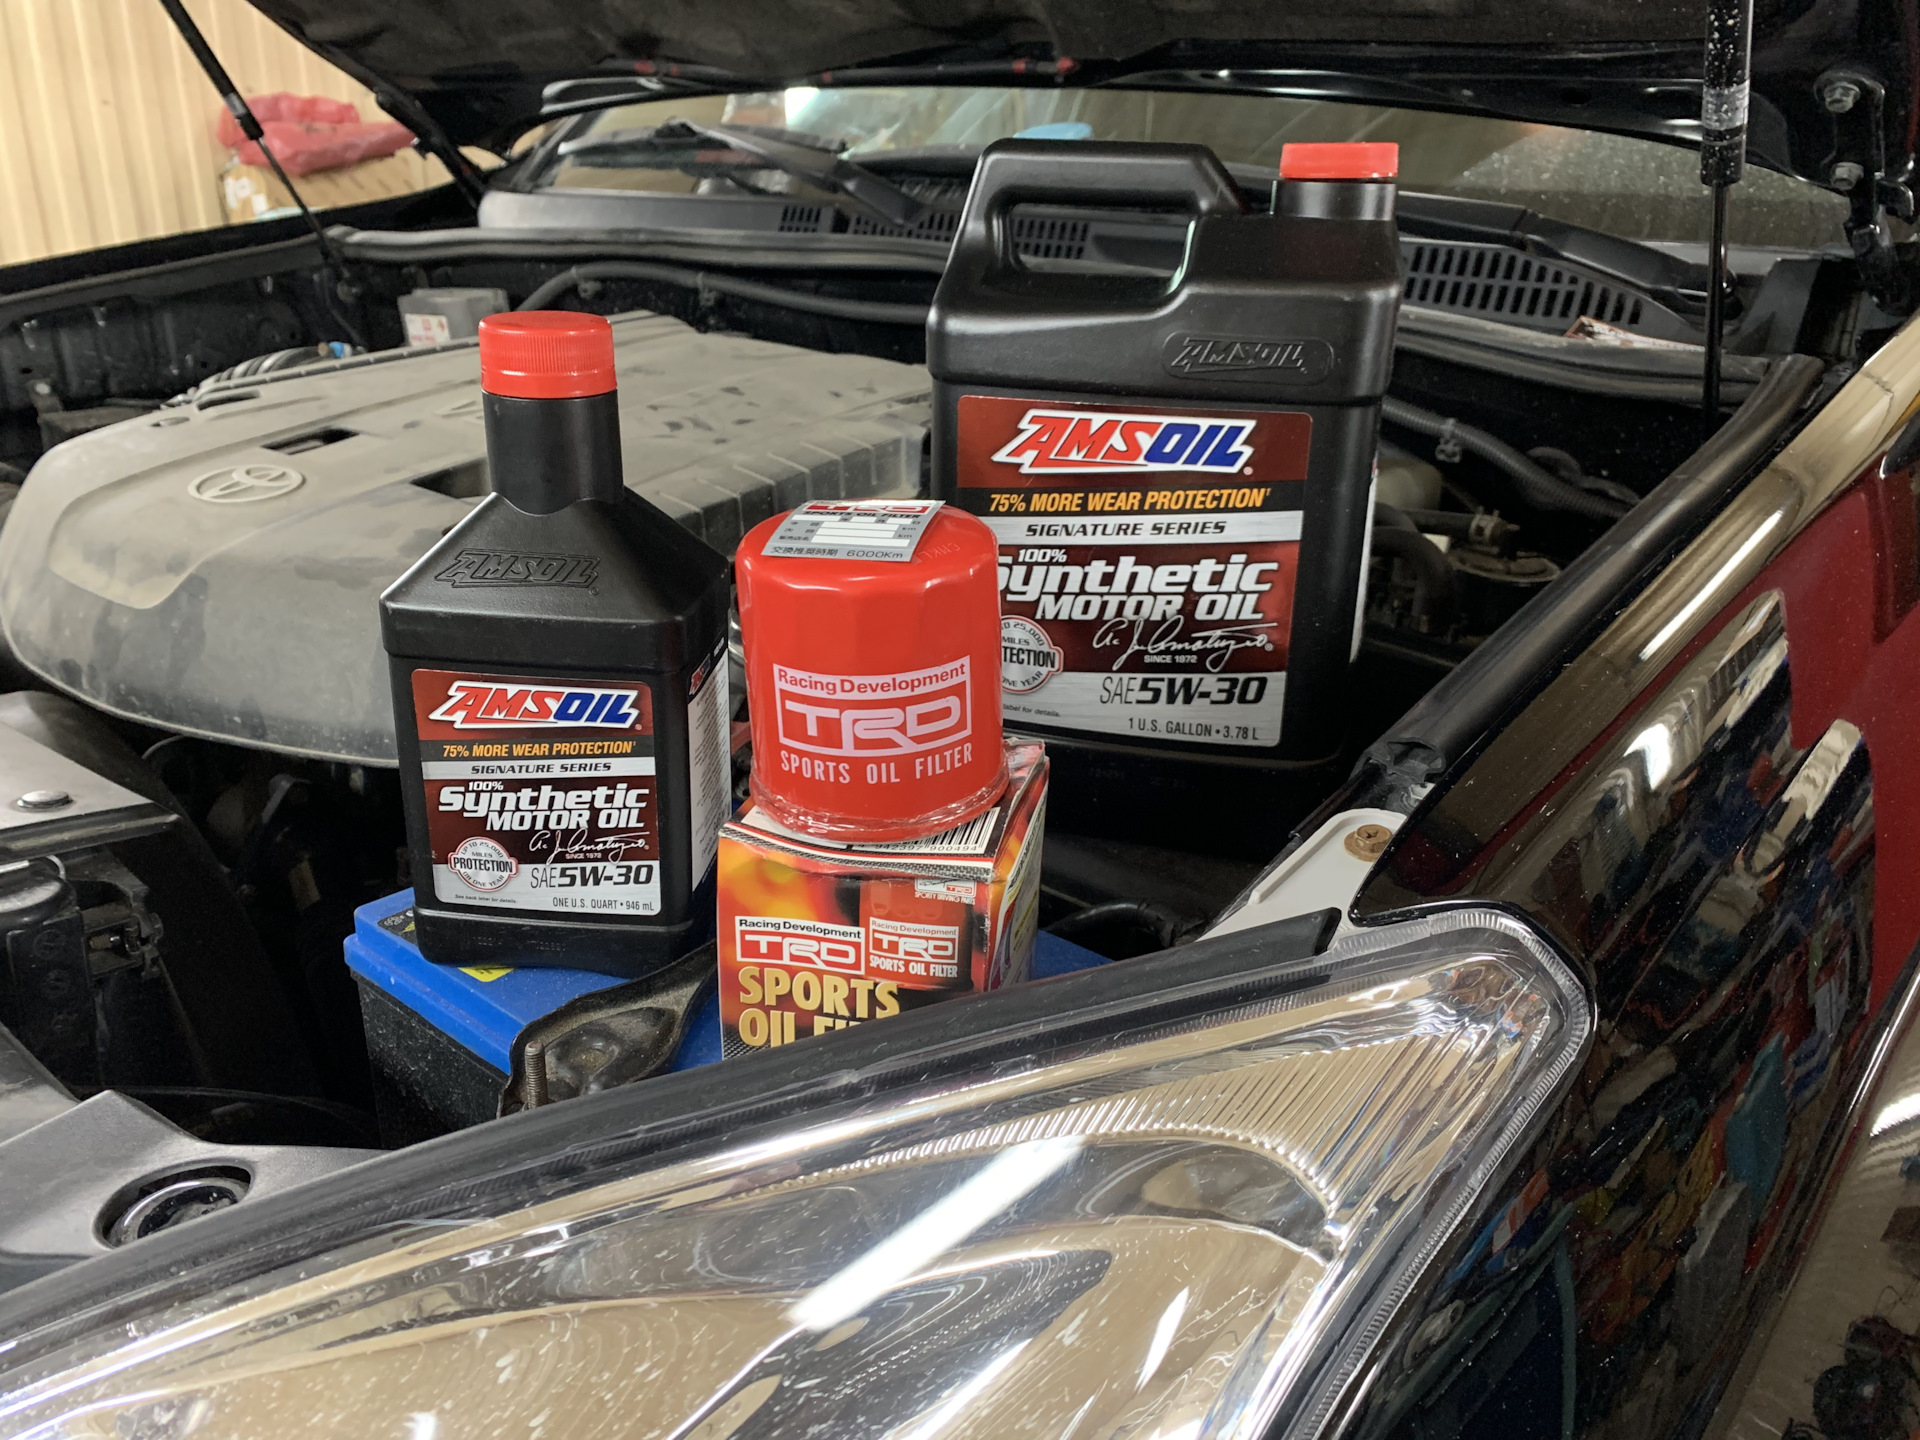 AMSOIL Signature Series Synthetic Motor Oil 5w-30. AMSOIL логотип. AMSOIL обкаточное масло. AMSOIL Championship off Road. Масло для прадо 120